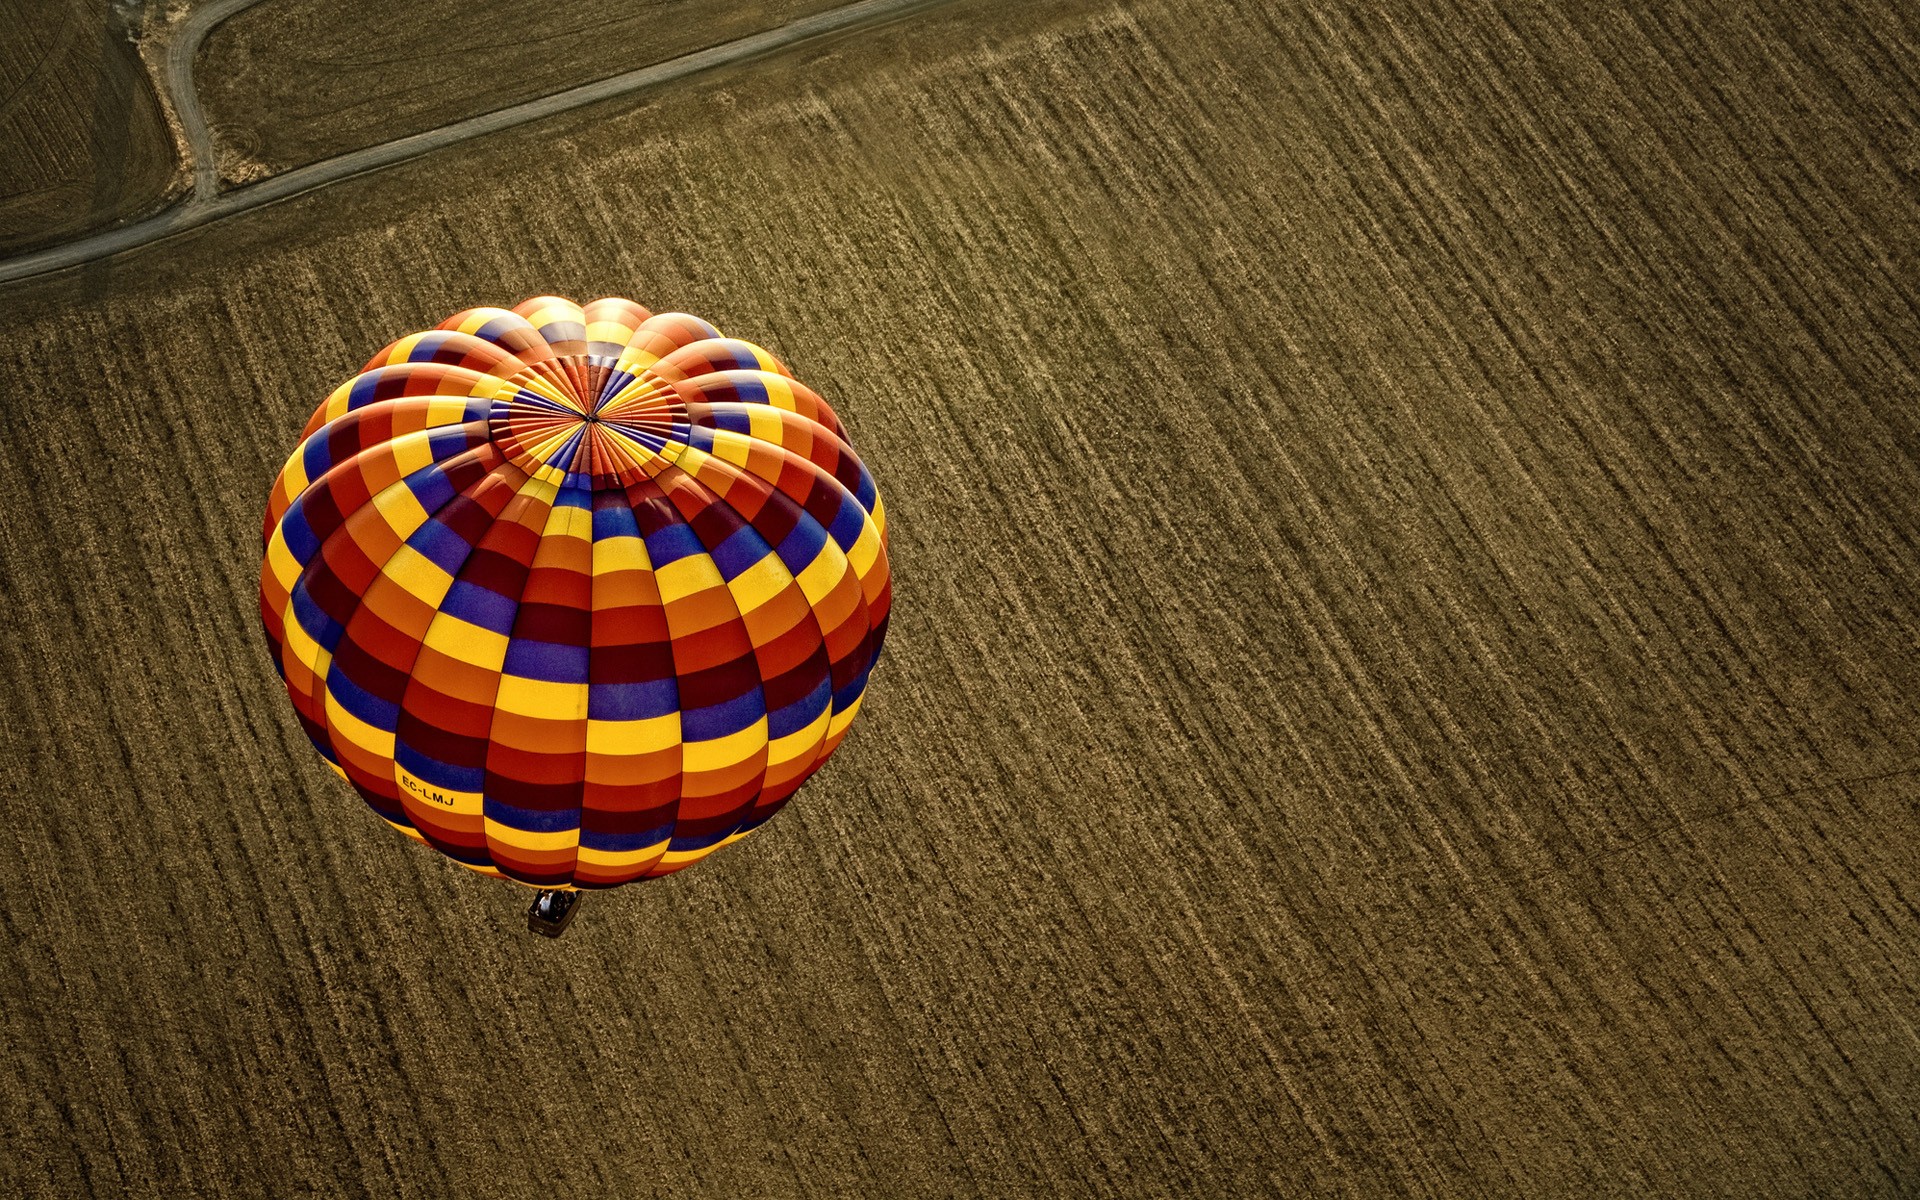 General 1920x1200 nature landscape hot air balloons field aerial view top view colorful vehicle